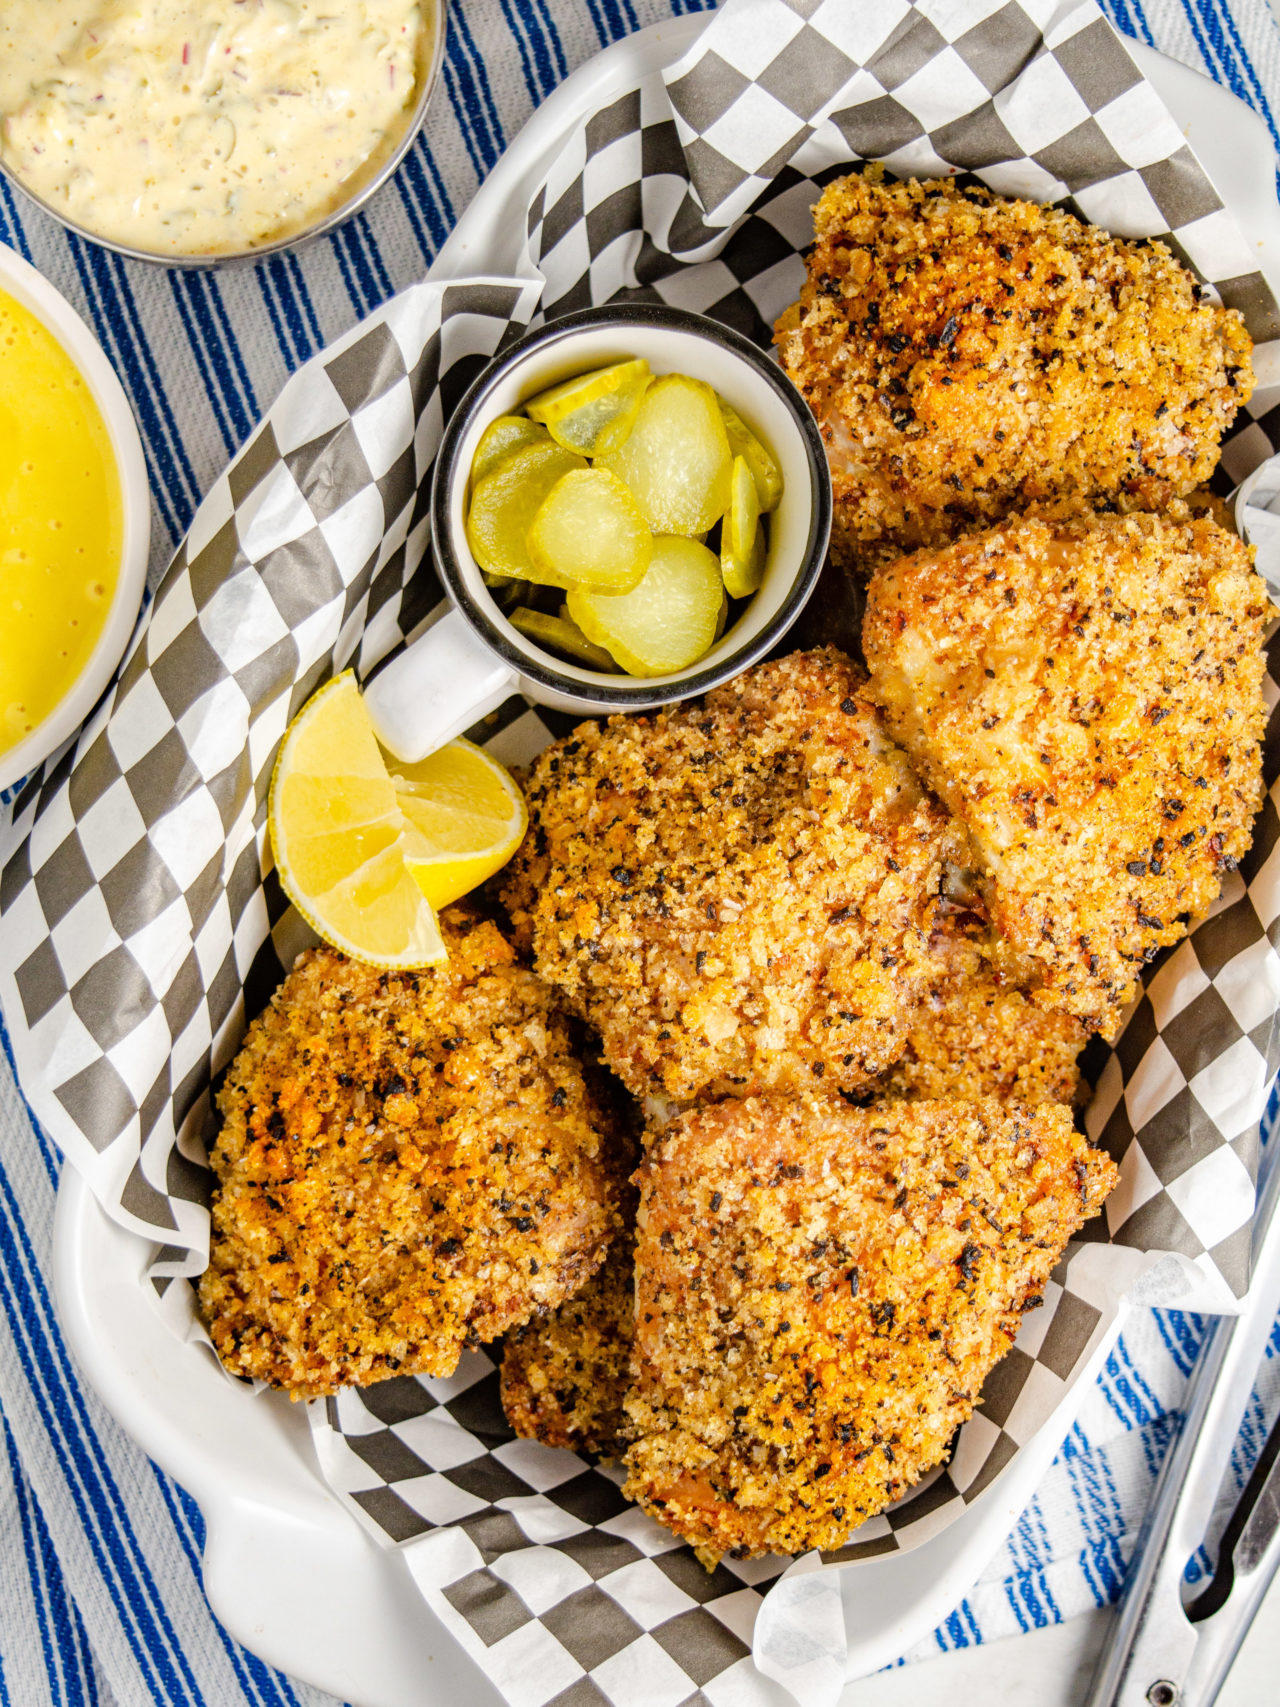 A basket of fried chicken - food photography